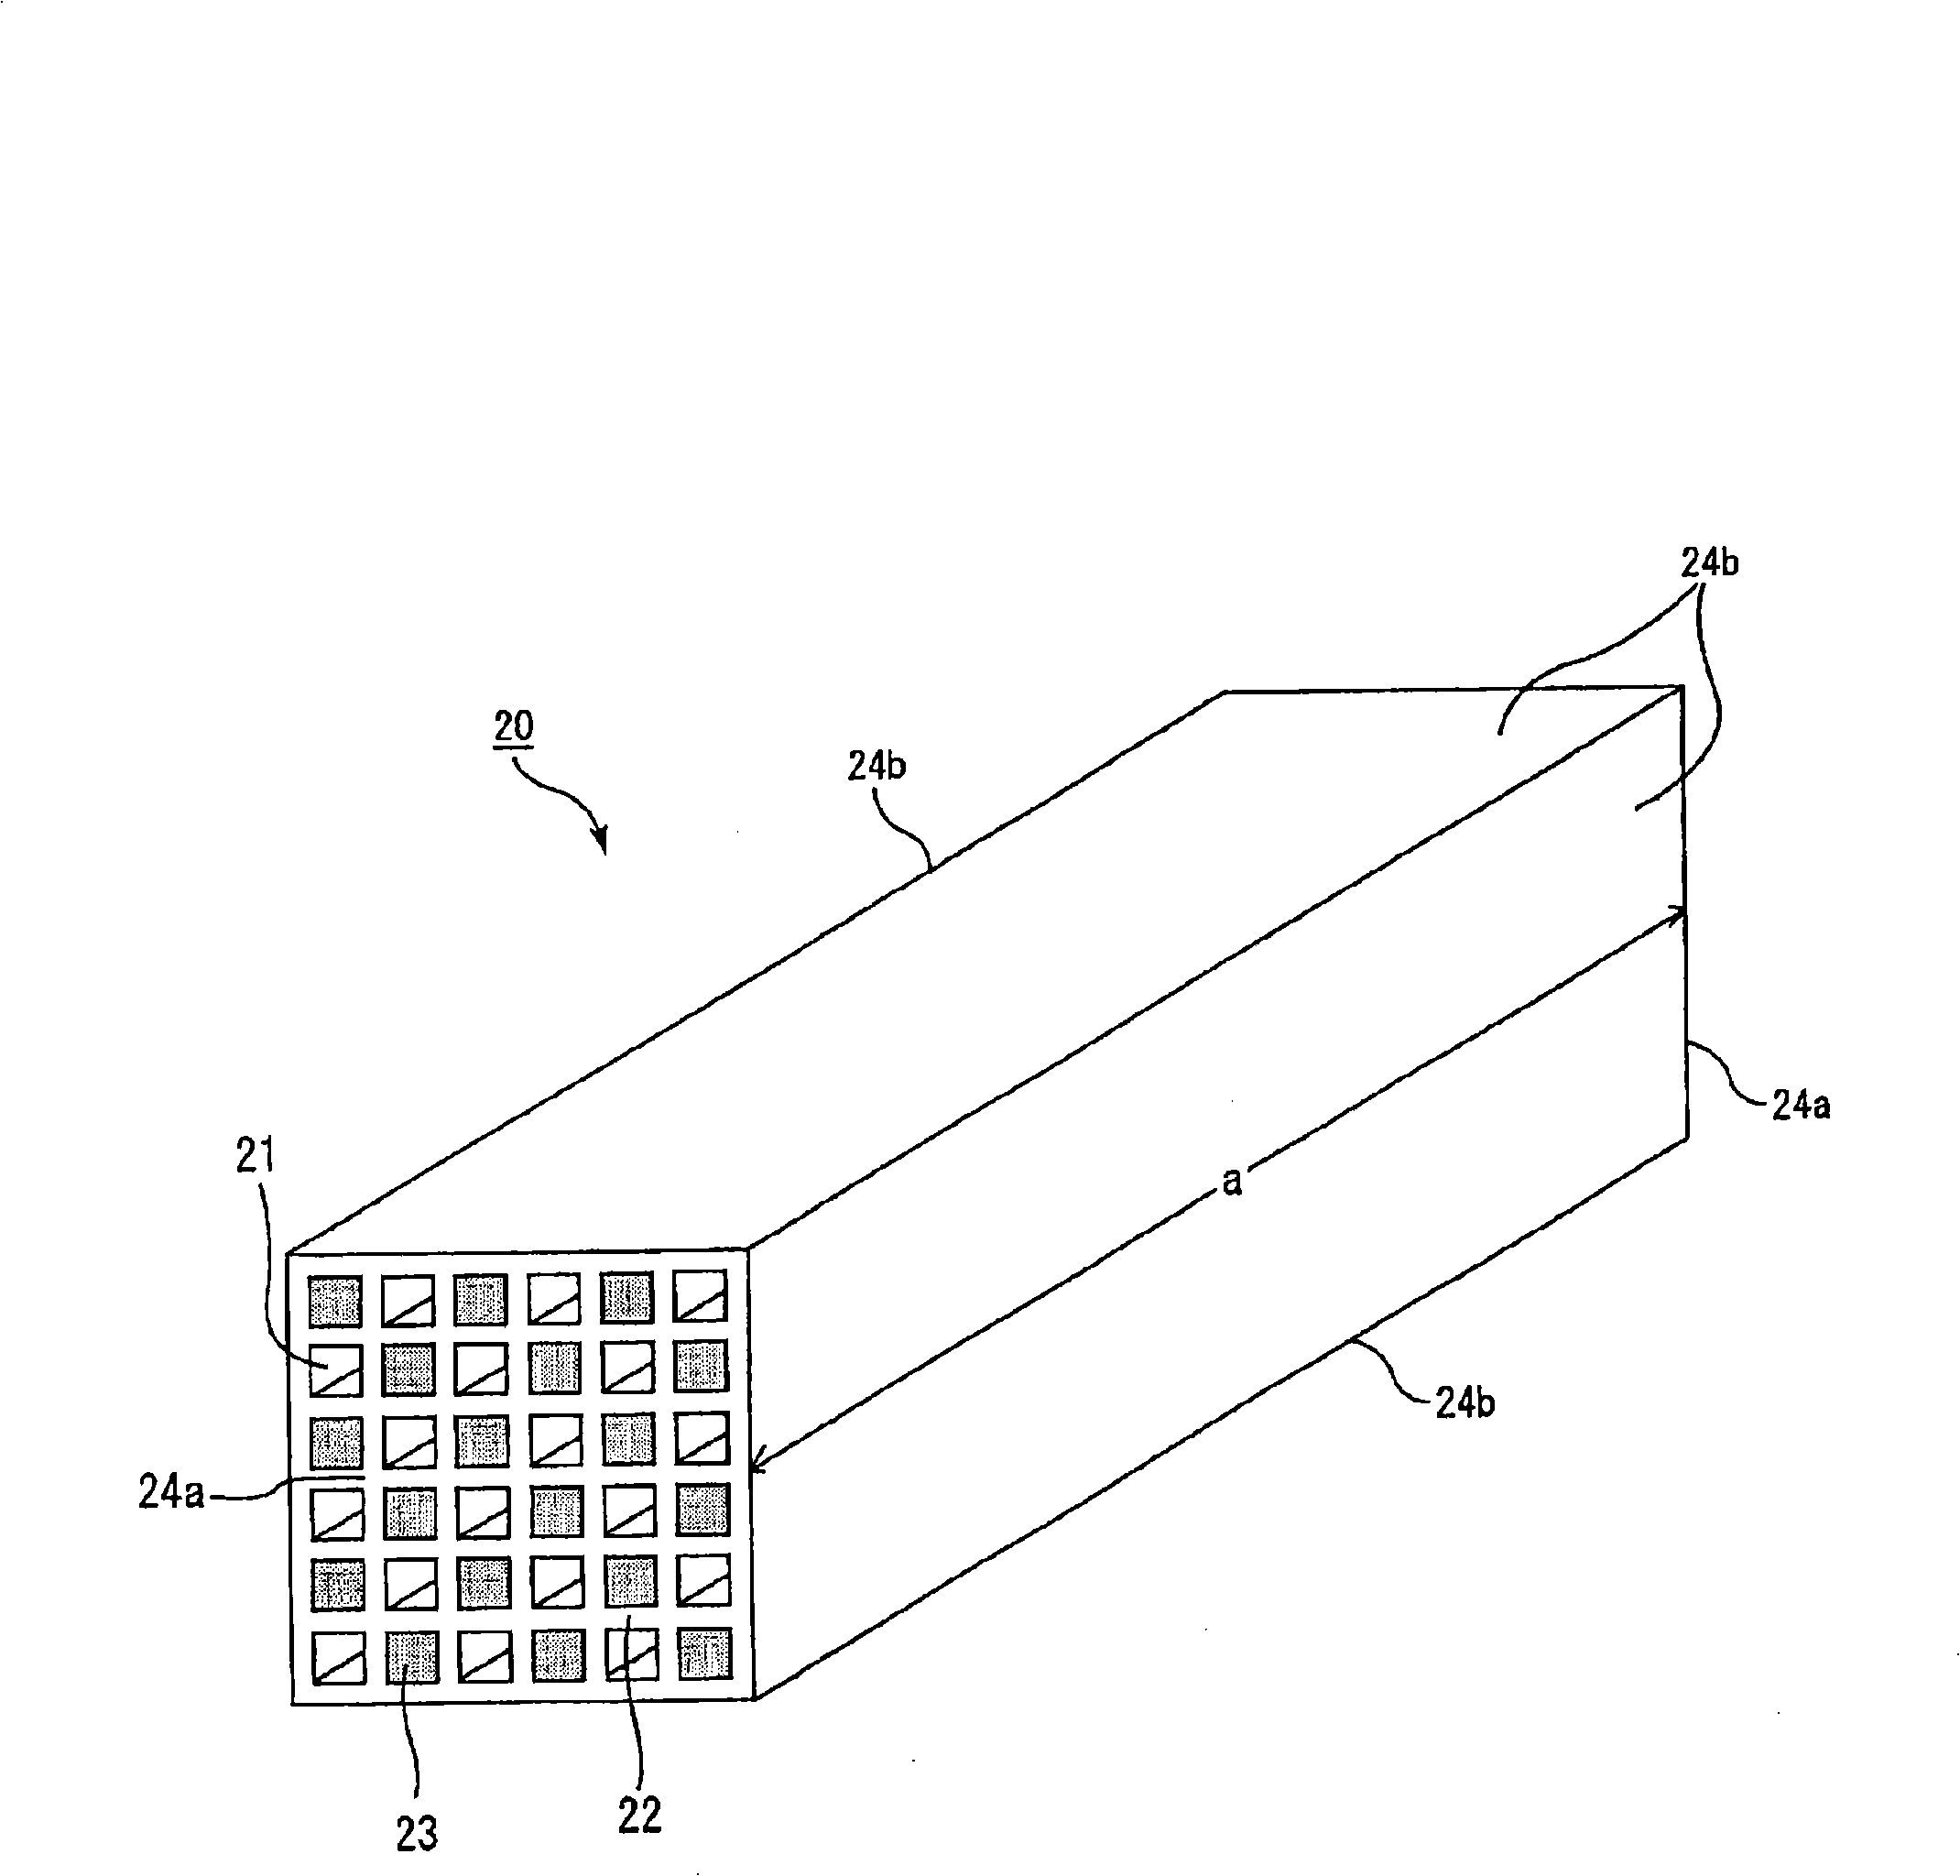 Firing jig and method for manufacturing honeycomb structured body